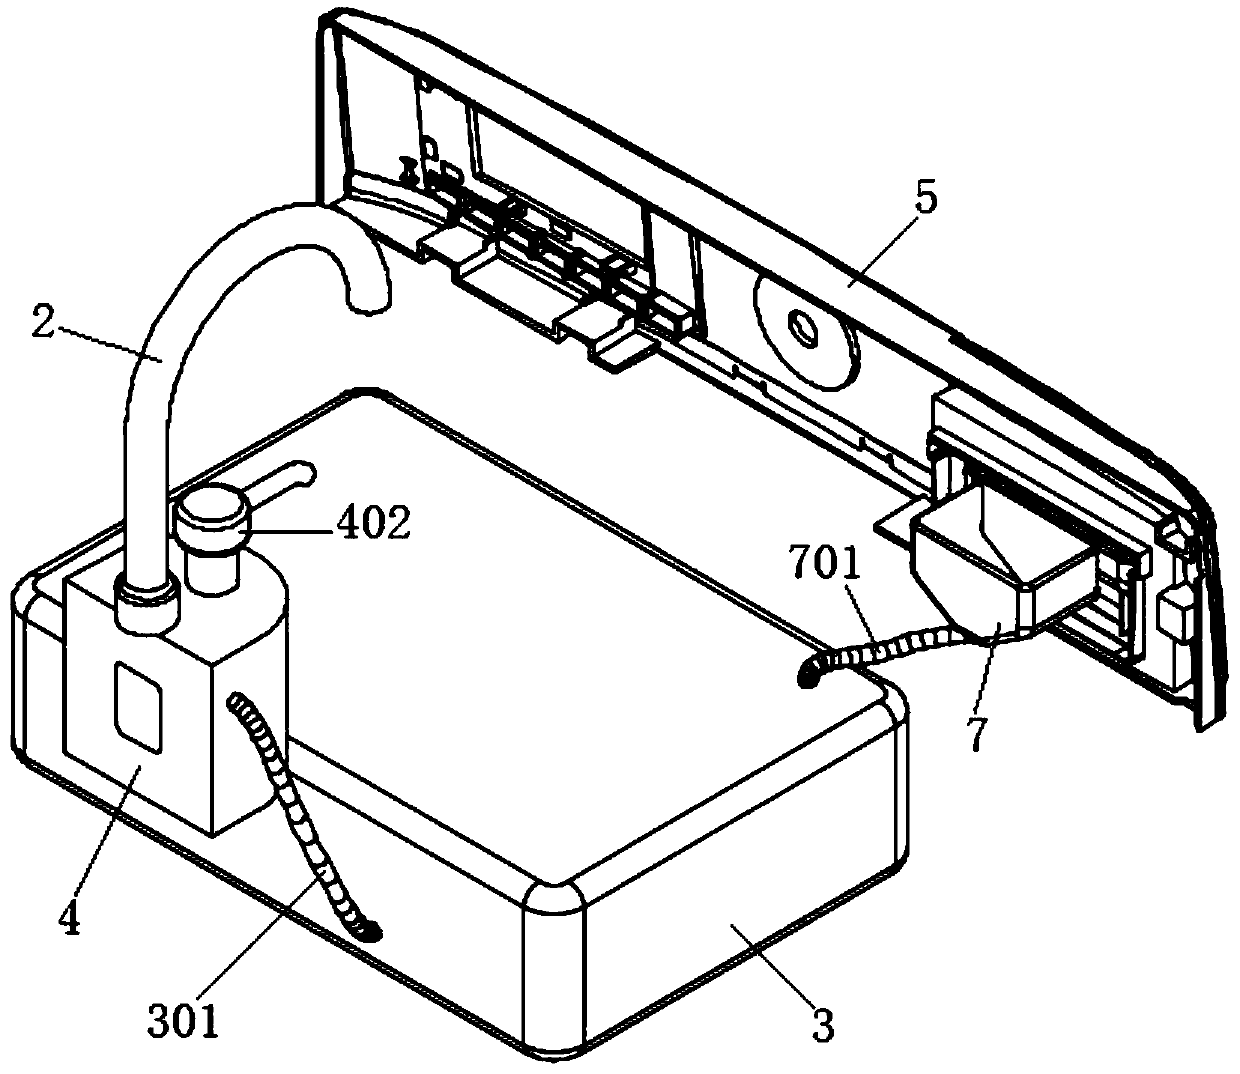 Clothes washing device with clothes rubbing structure